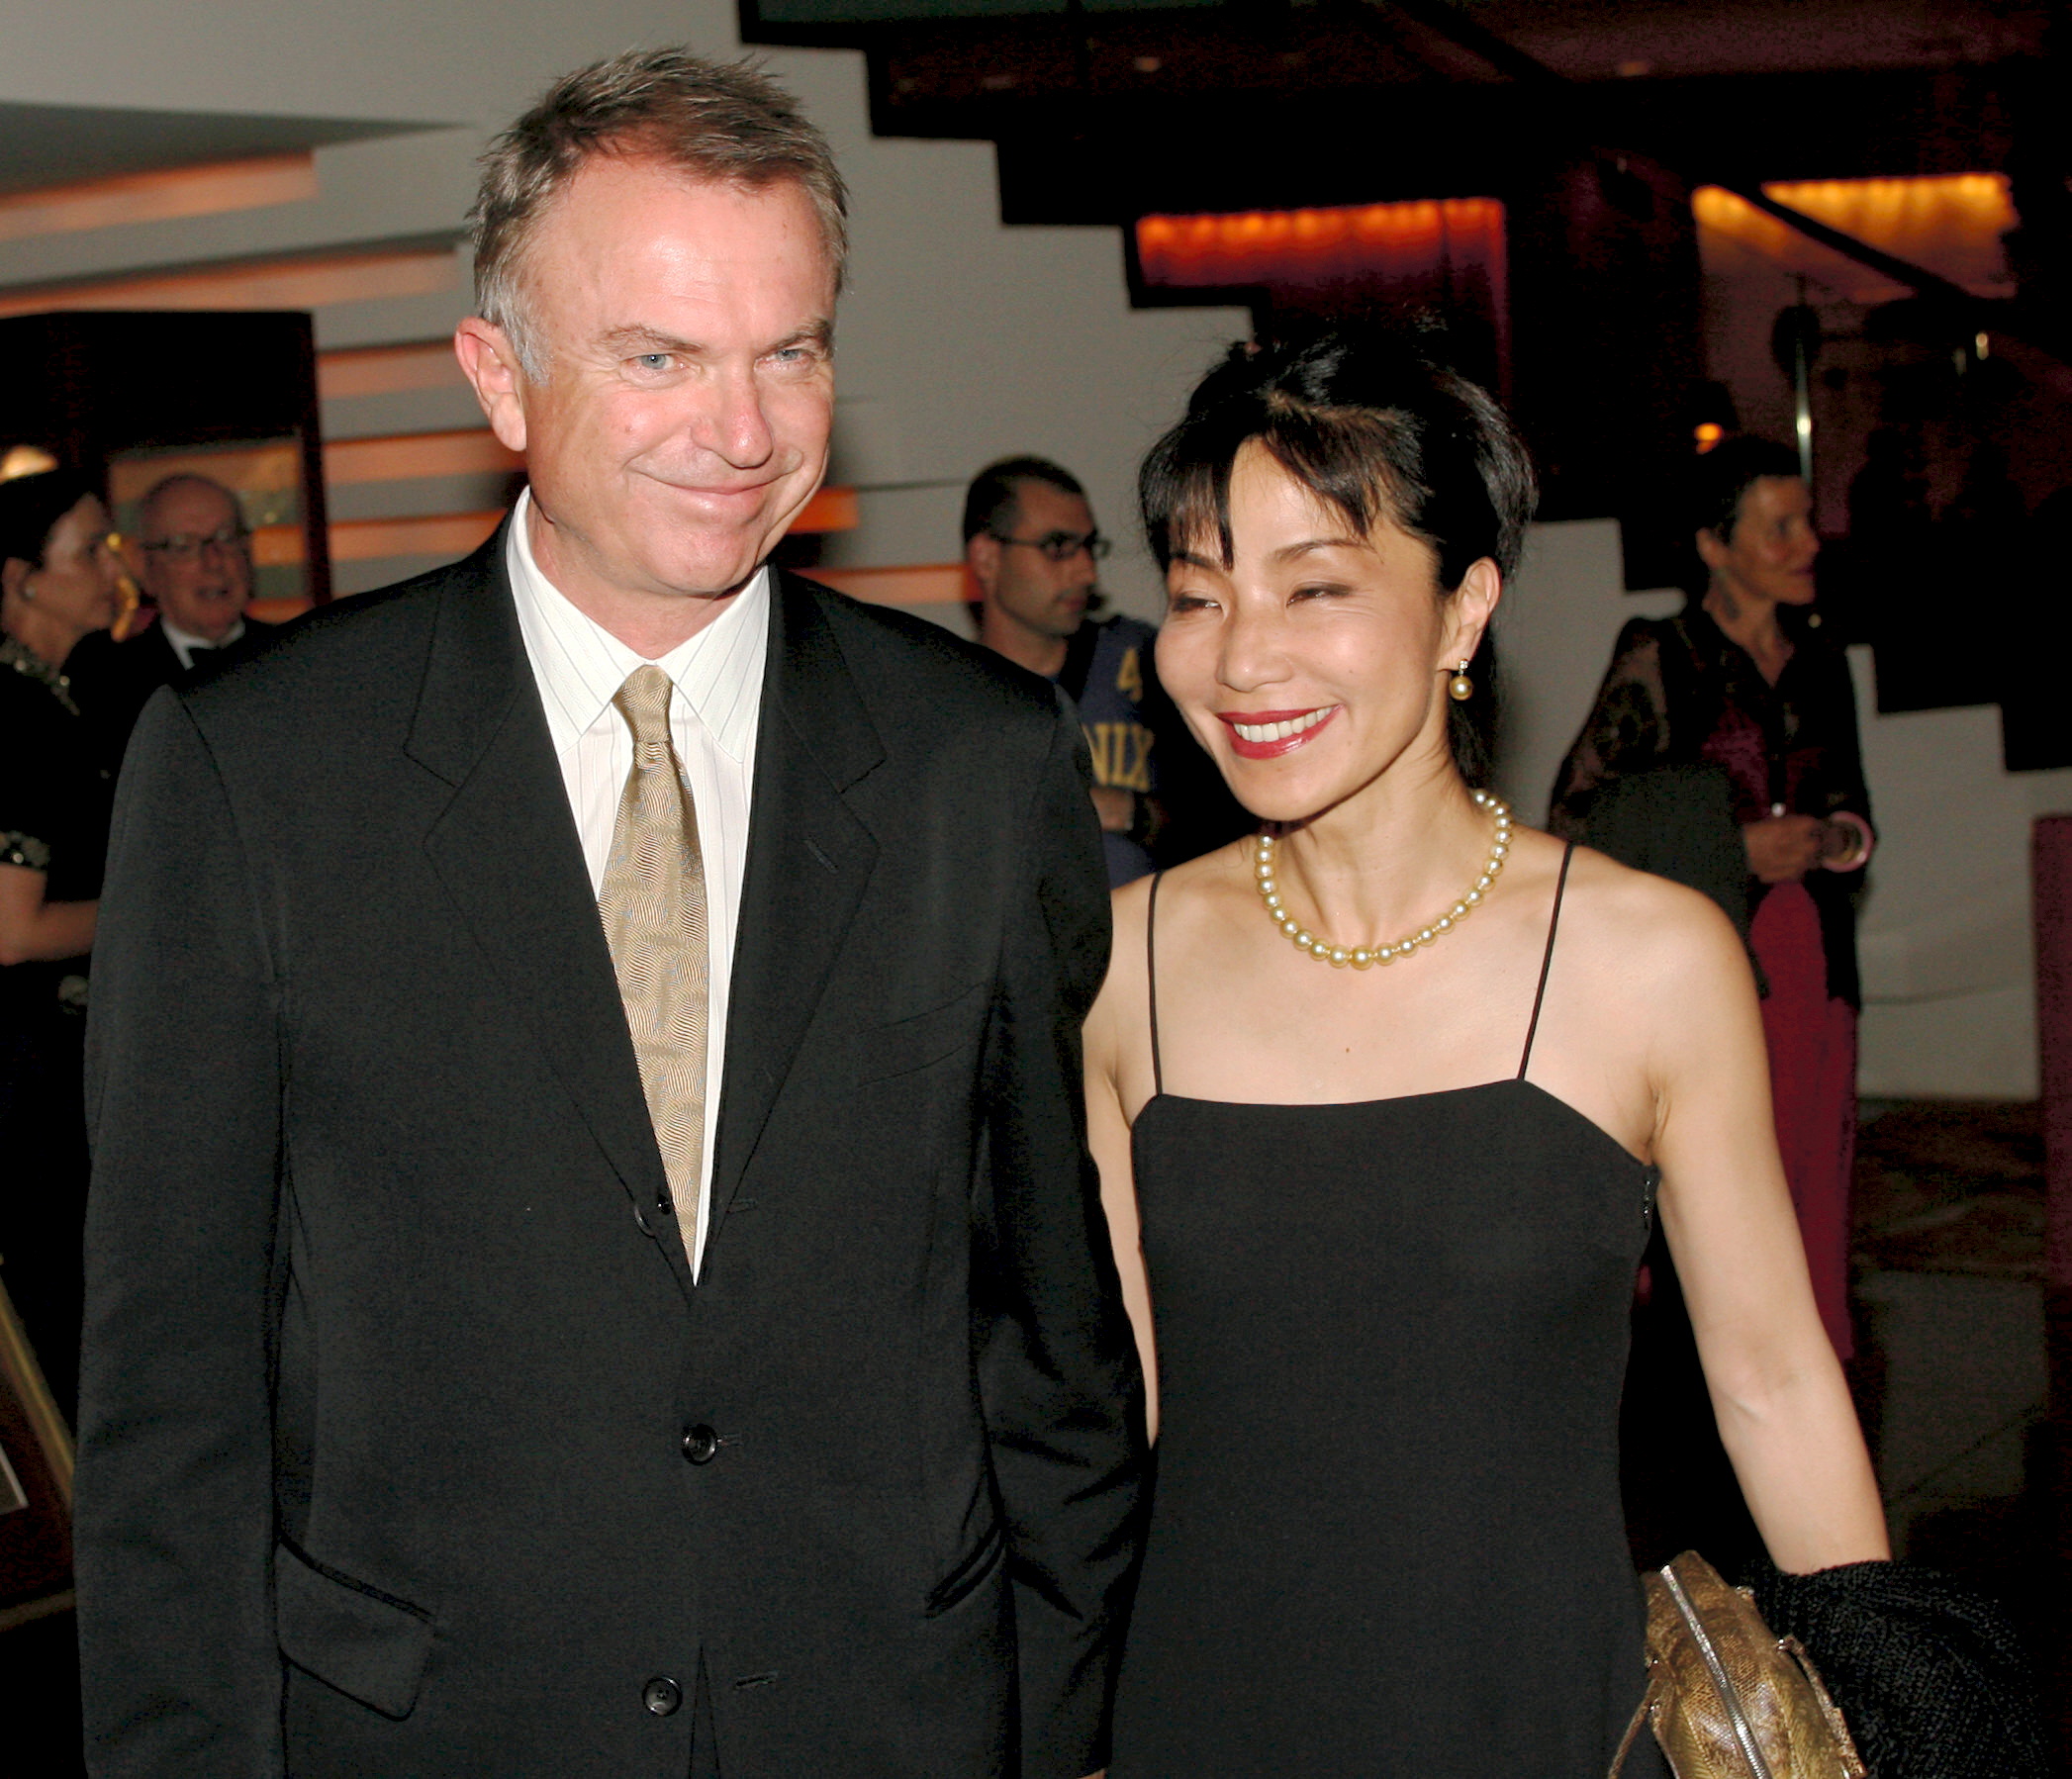 Sam Neill and Noriko Watanabe at the Hollywood Nights fundraising event for the Prince of Wales Hospital at the Four Season Hotel on November 23, 2006, Sydney, Australia. | Source: Getty Images